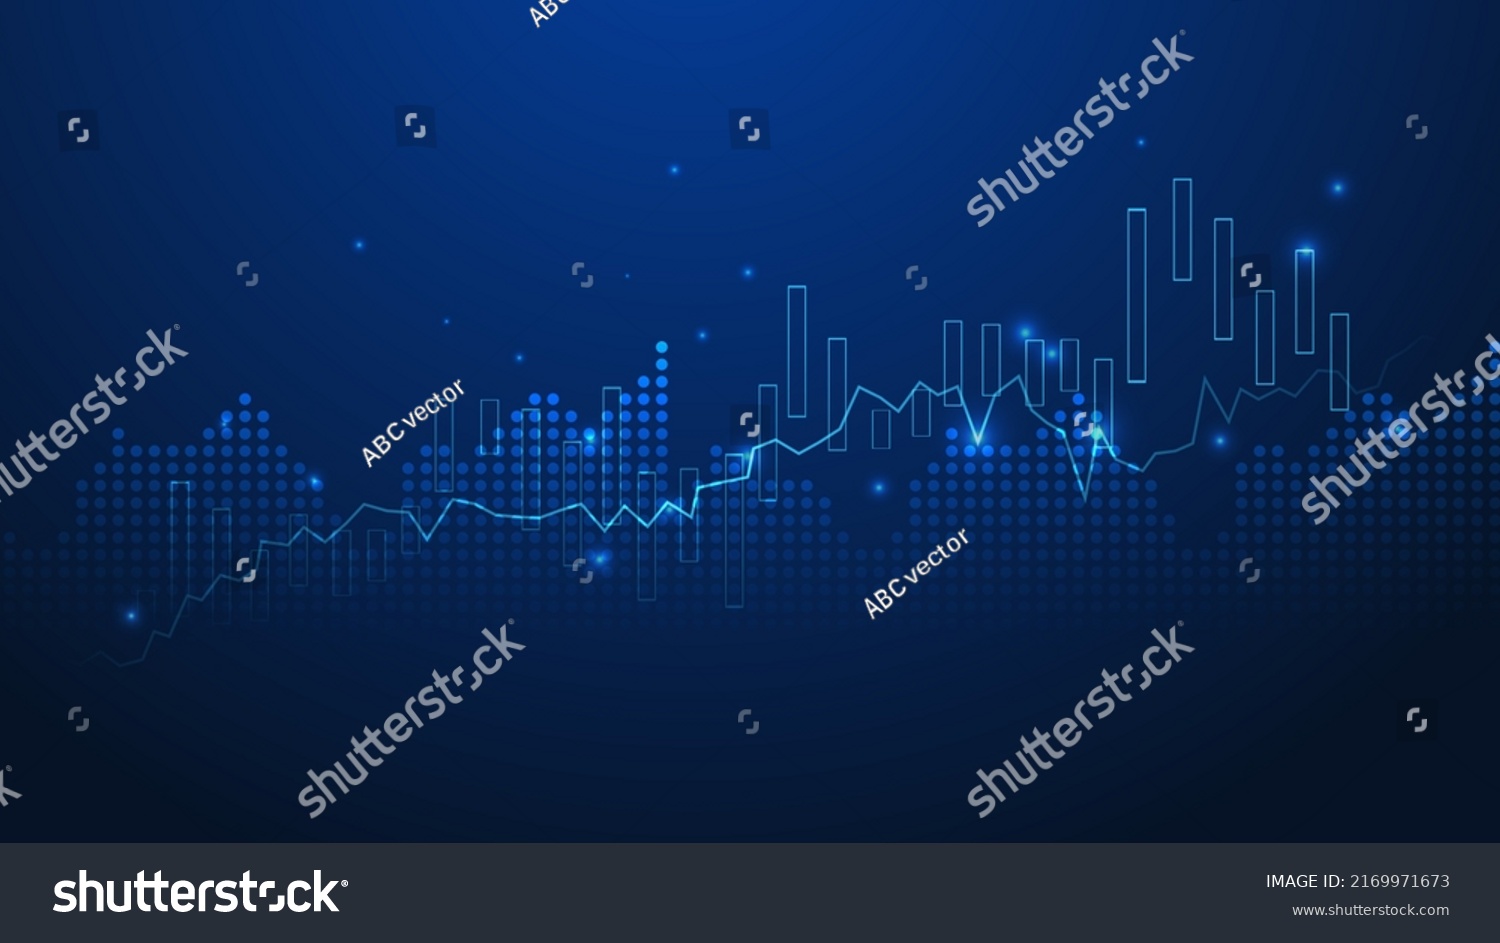 Business candle stick graph chart of stock market investment trading on blue background. Bullish point, up trend of graph. Economy vector design #2169971673